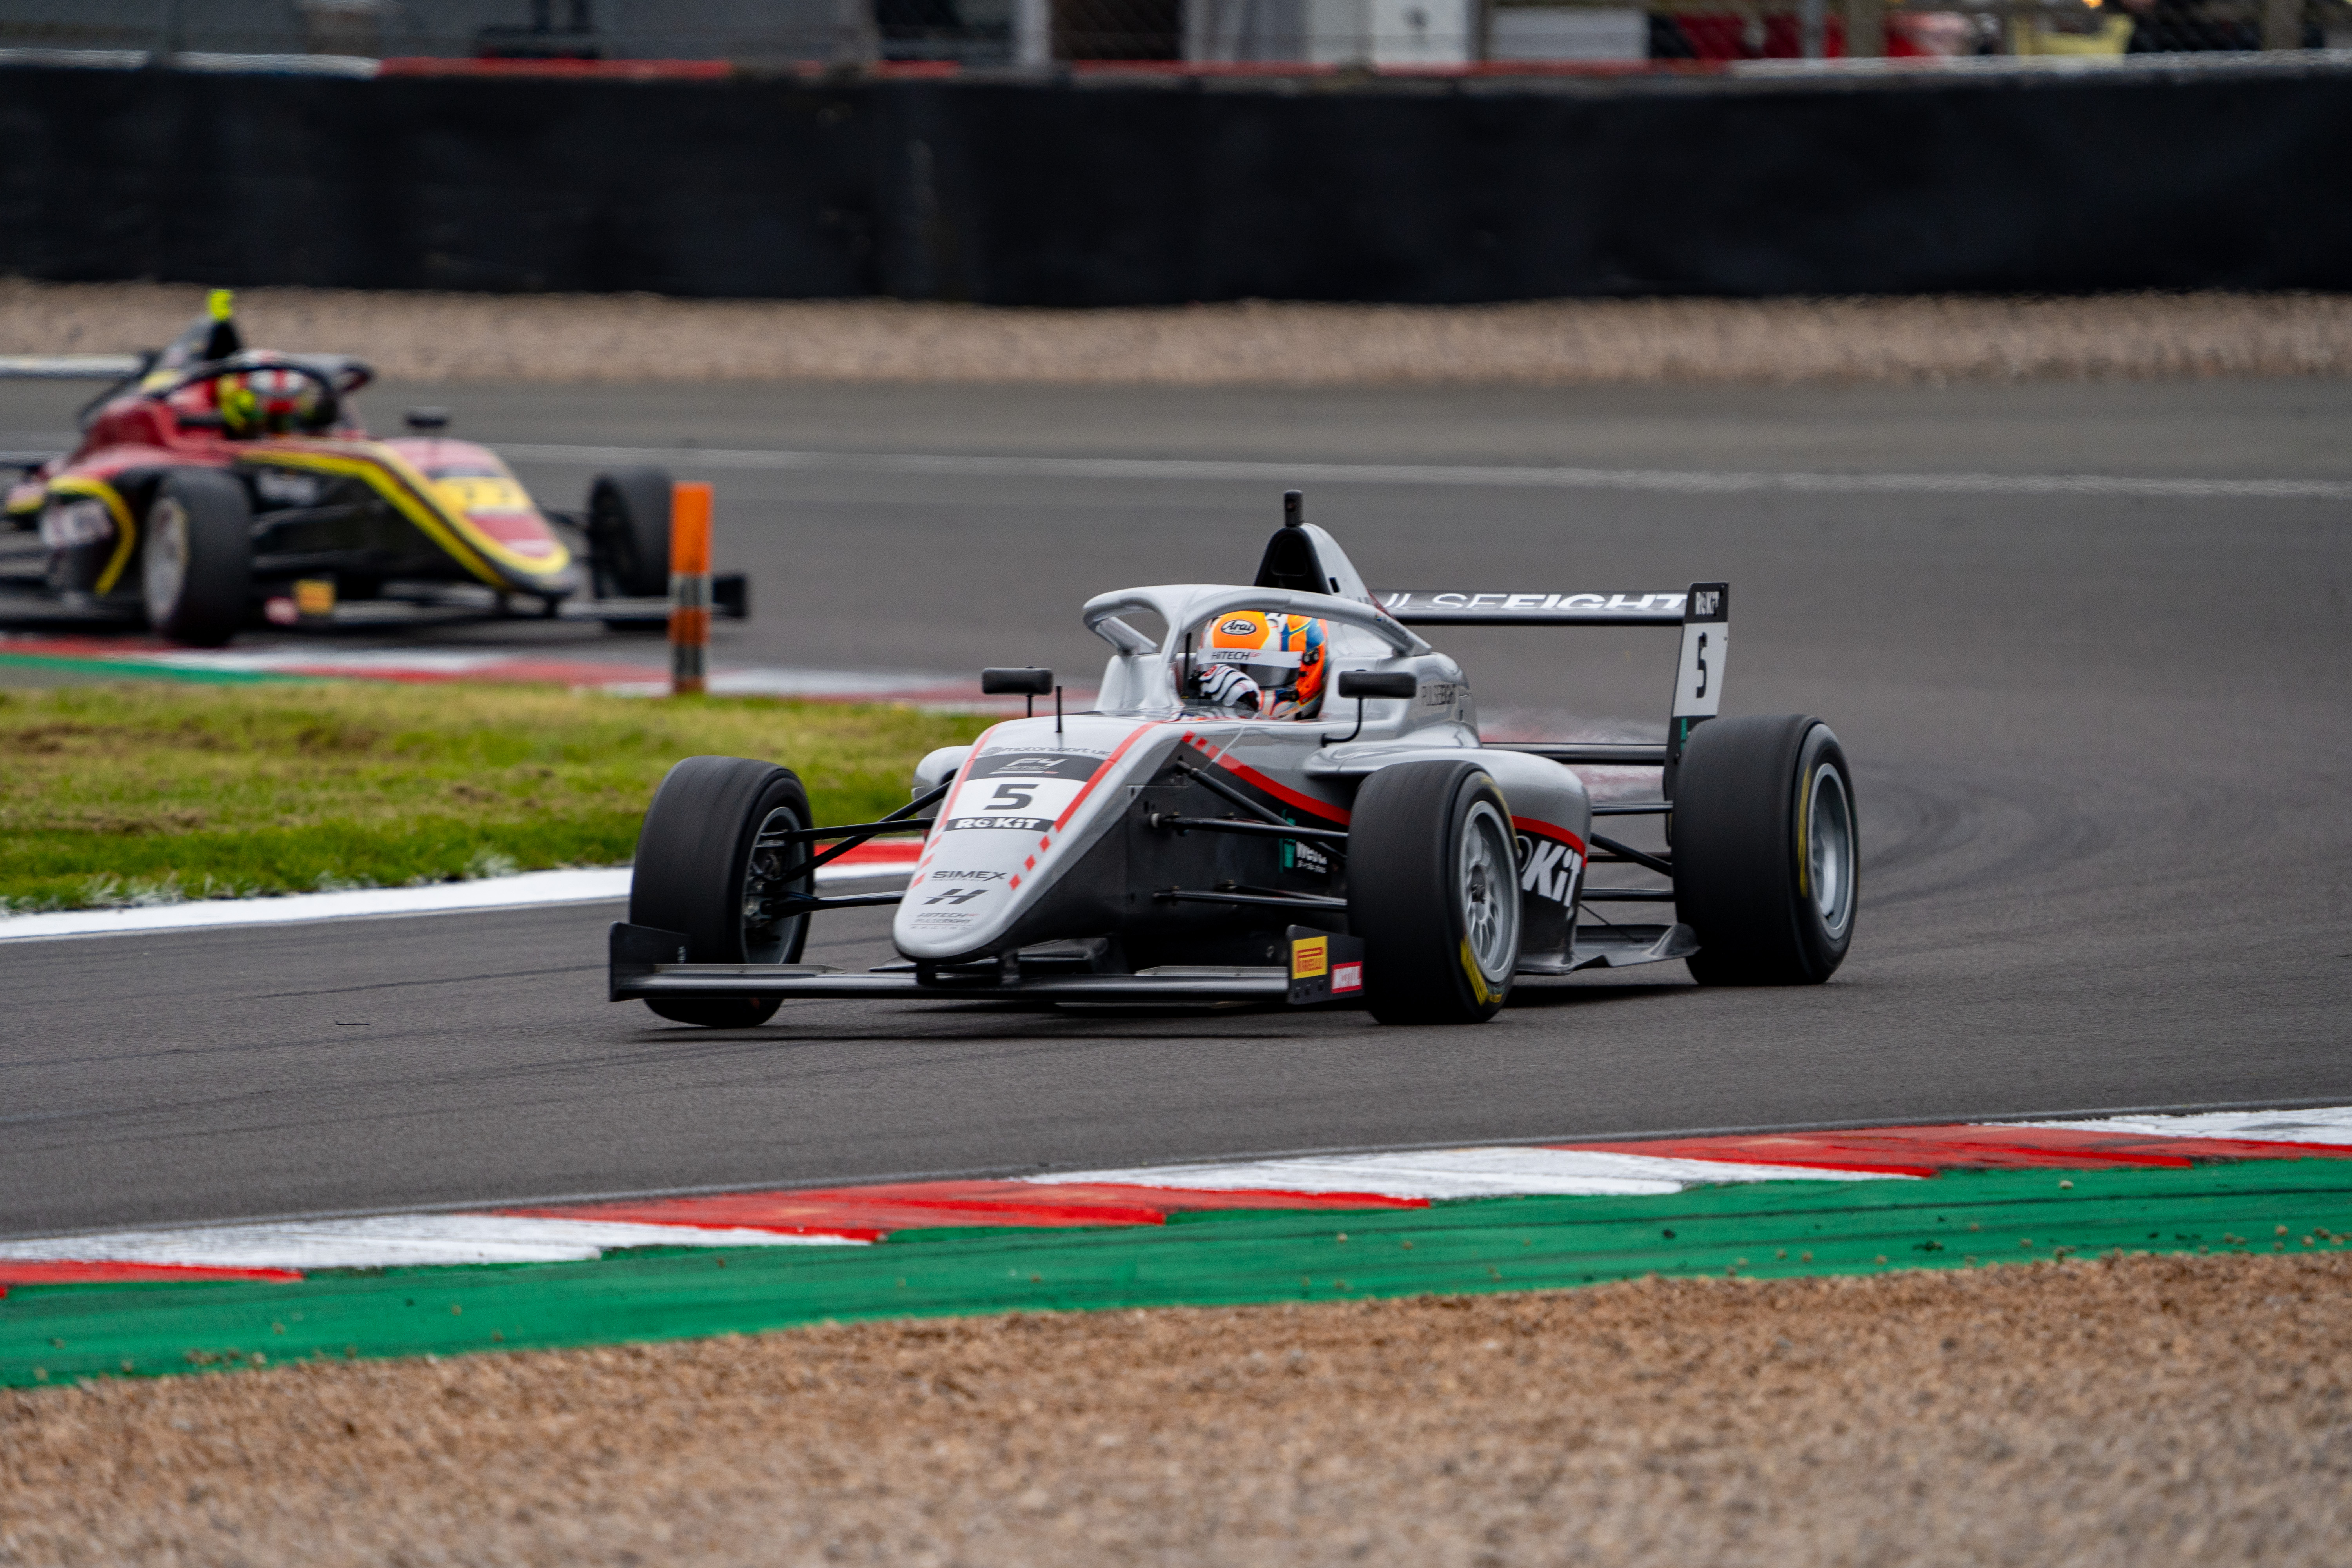 Mika Abrahams Clinches Maiden Victory in Dramatic ROKiT British F4 Showdown at Donington Park